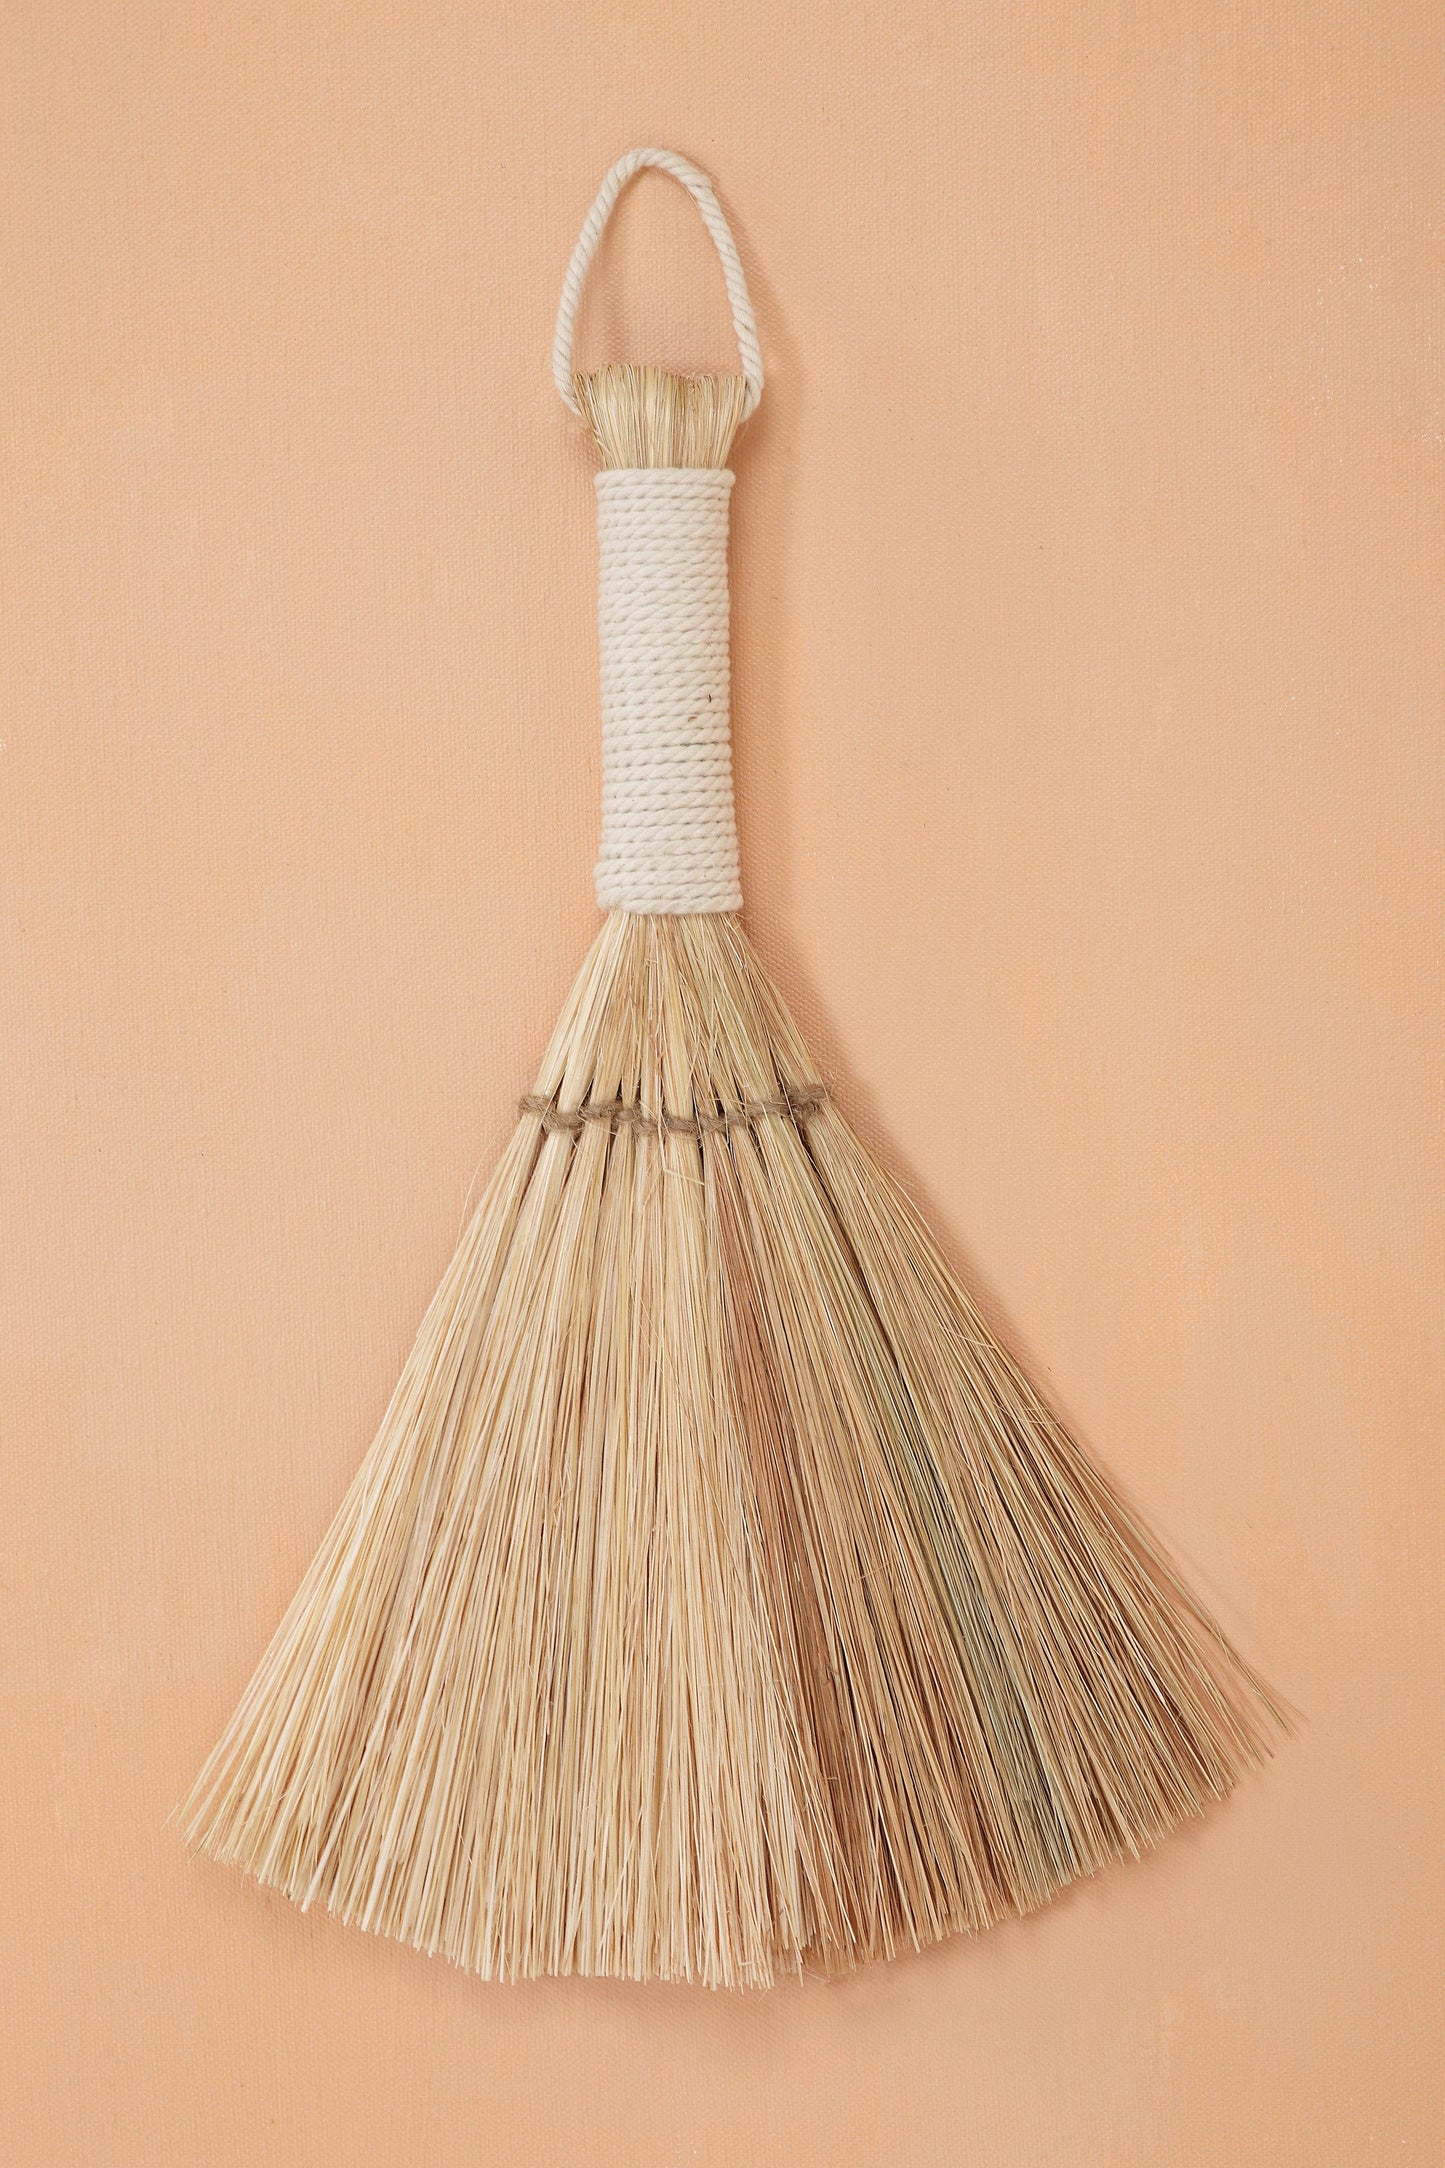 Natural Grass Wing Broom Decor - 14.5 inch